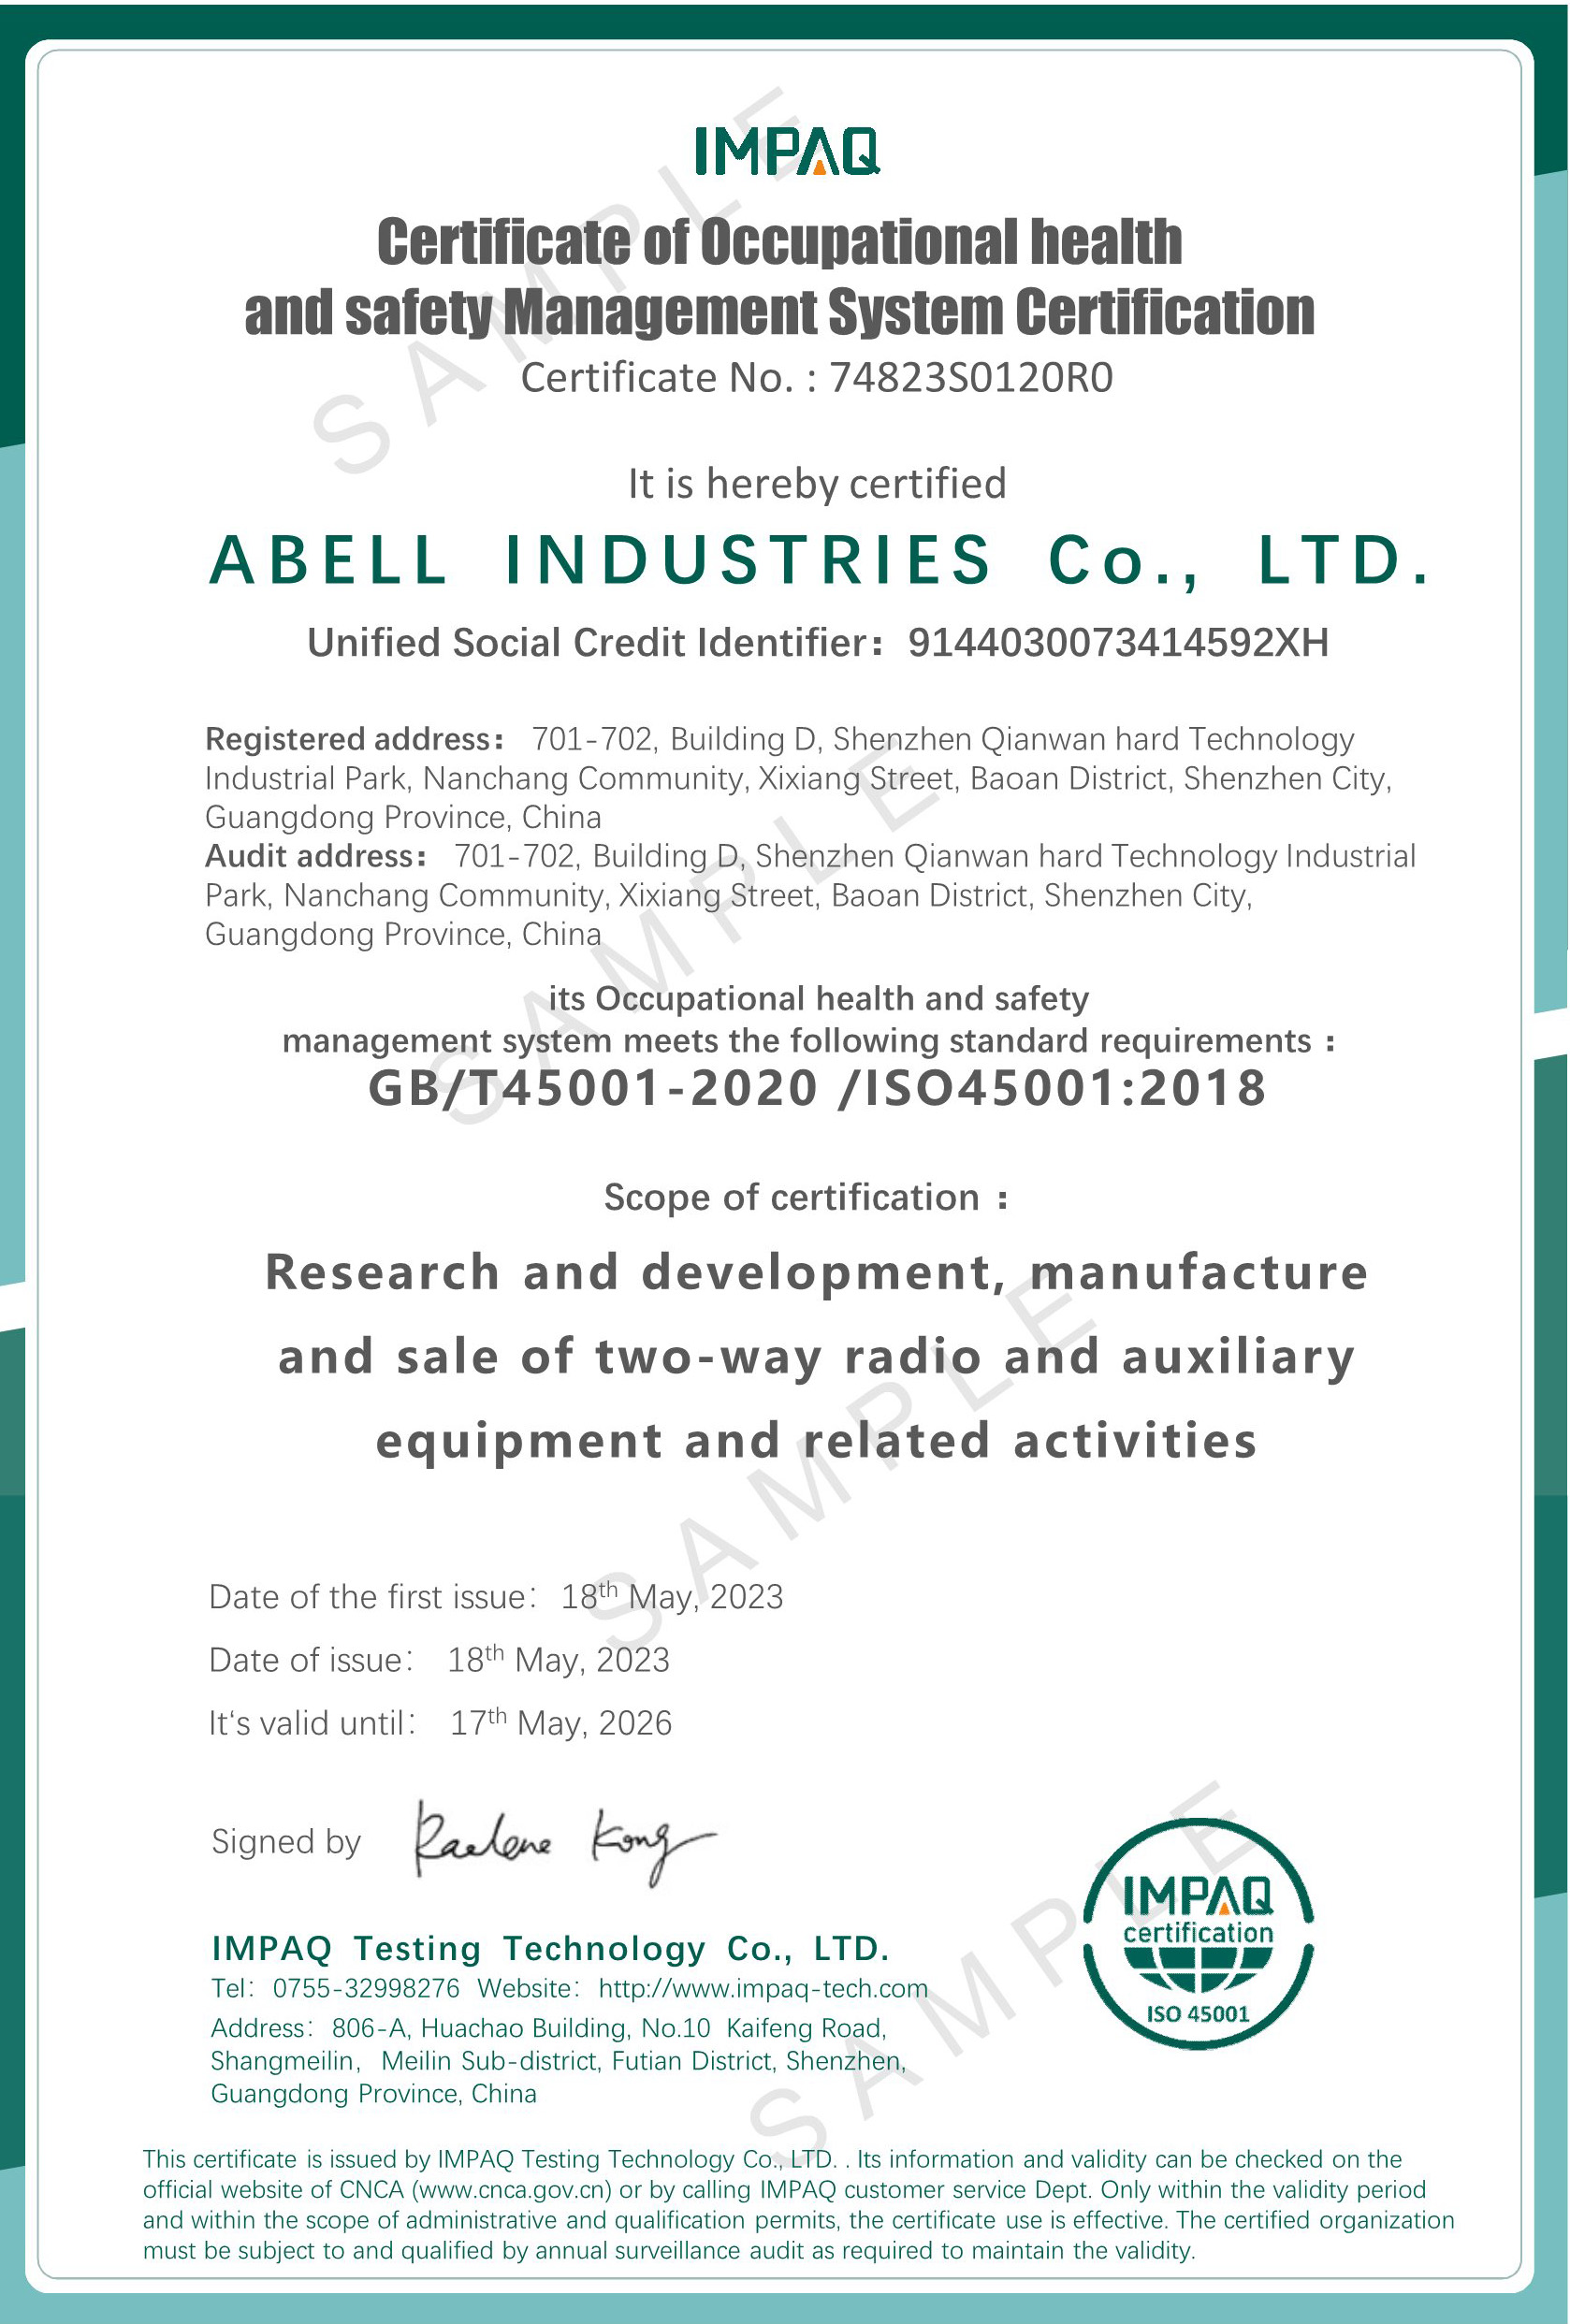 In May 2023, ABELL received certifications for its Occupational Health and Safety Management System.